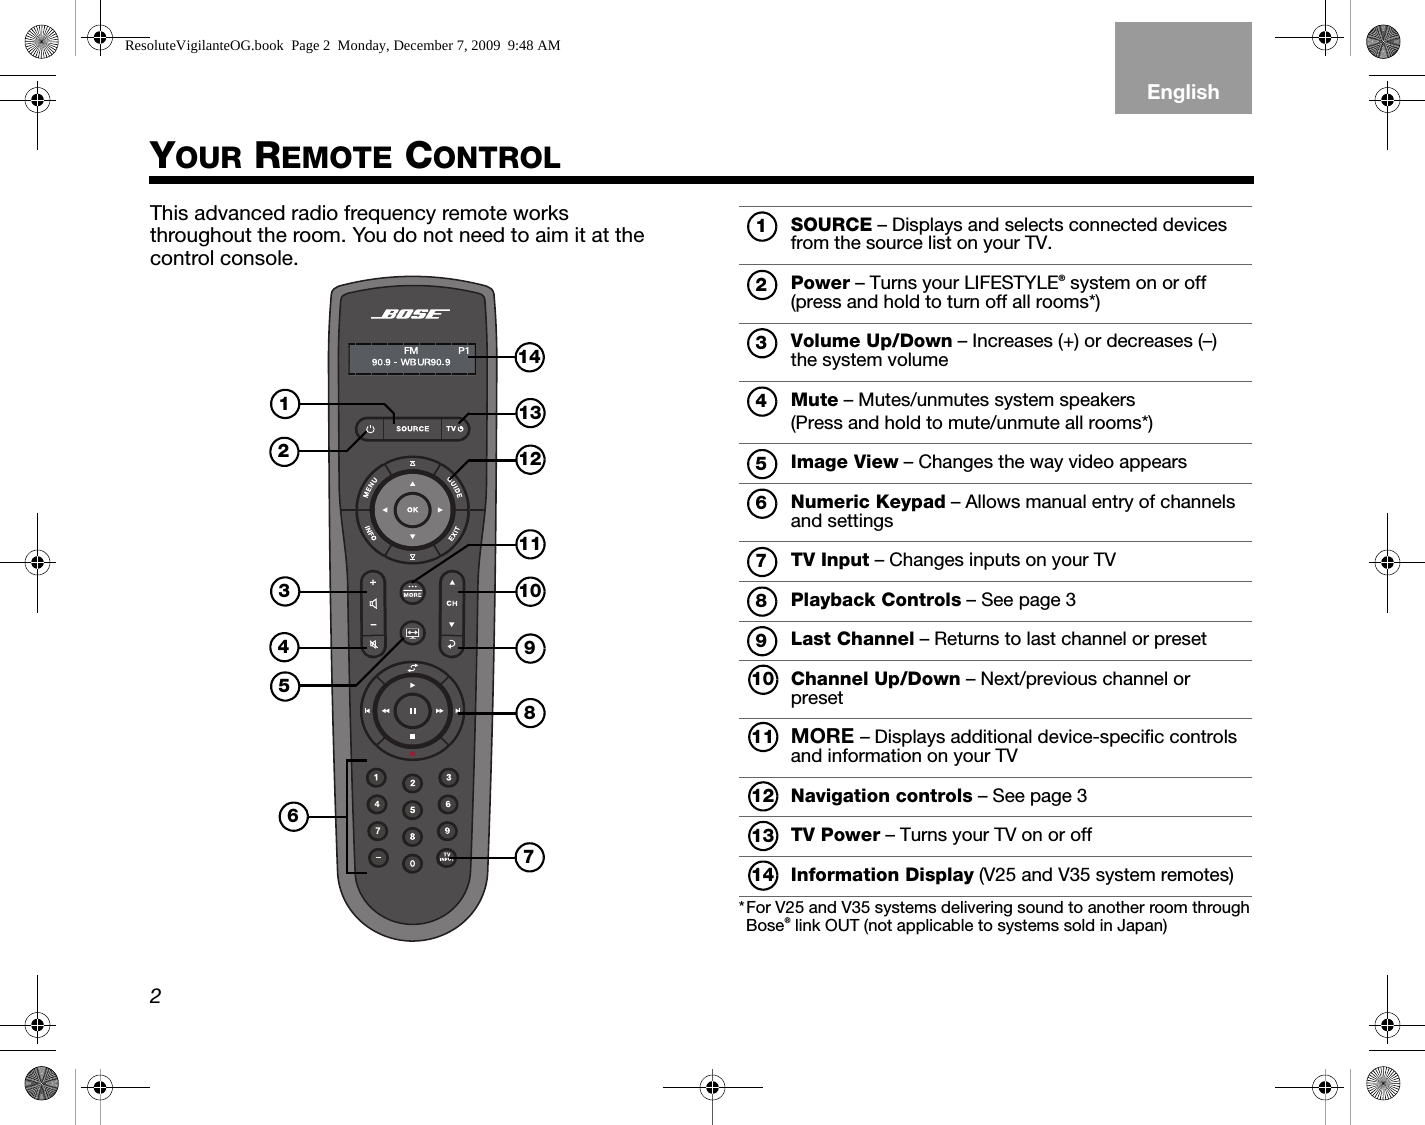 2EnglishTAB 6TAB 8 TAB 7 TAB 3TAB 5 TAB 2TAB 4YOUR REMOTE CONTROL This advanced radio frequency remote works throughout the room. You do not need to aim it at the control console. *For V25 and V35 systems delivering sound to another room throughBose® link OUT (not applicable to systems sold in Japan)The BeatlesiPod 3:201413121110987654321SOURCE – Displays and selects connected devices from the source list on your TV.Power – Turns your LIFESTYLE® system on or off (press and hold to turn off all rooms*)Volume Up/Down – Increases (+) or decreases (–) the system volumeMute – Mutes/unmutes system speakers (Press and hold to mute/unmute all rooms*)Image View – Changes the way video appearsNumeric Keypad – Allows manual entry of channels and settingsTV Input – Changes inputs on your TVPlayback Controls – See page 3Last Channel – Returns to last channel or presetChannel Up/Down – Next/previous channel or presetMORE – Displays additional device-specific controls and information on your TVNavigation controls – See page 3TV Power – Turns your TV on or offInformation Display (V25 and V35 system remotes)1234567891011121314ResoluteVigilanteOG.book  Page 2  Monday, December 7, 2009  9:48 AM